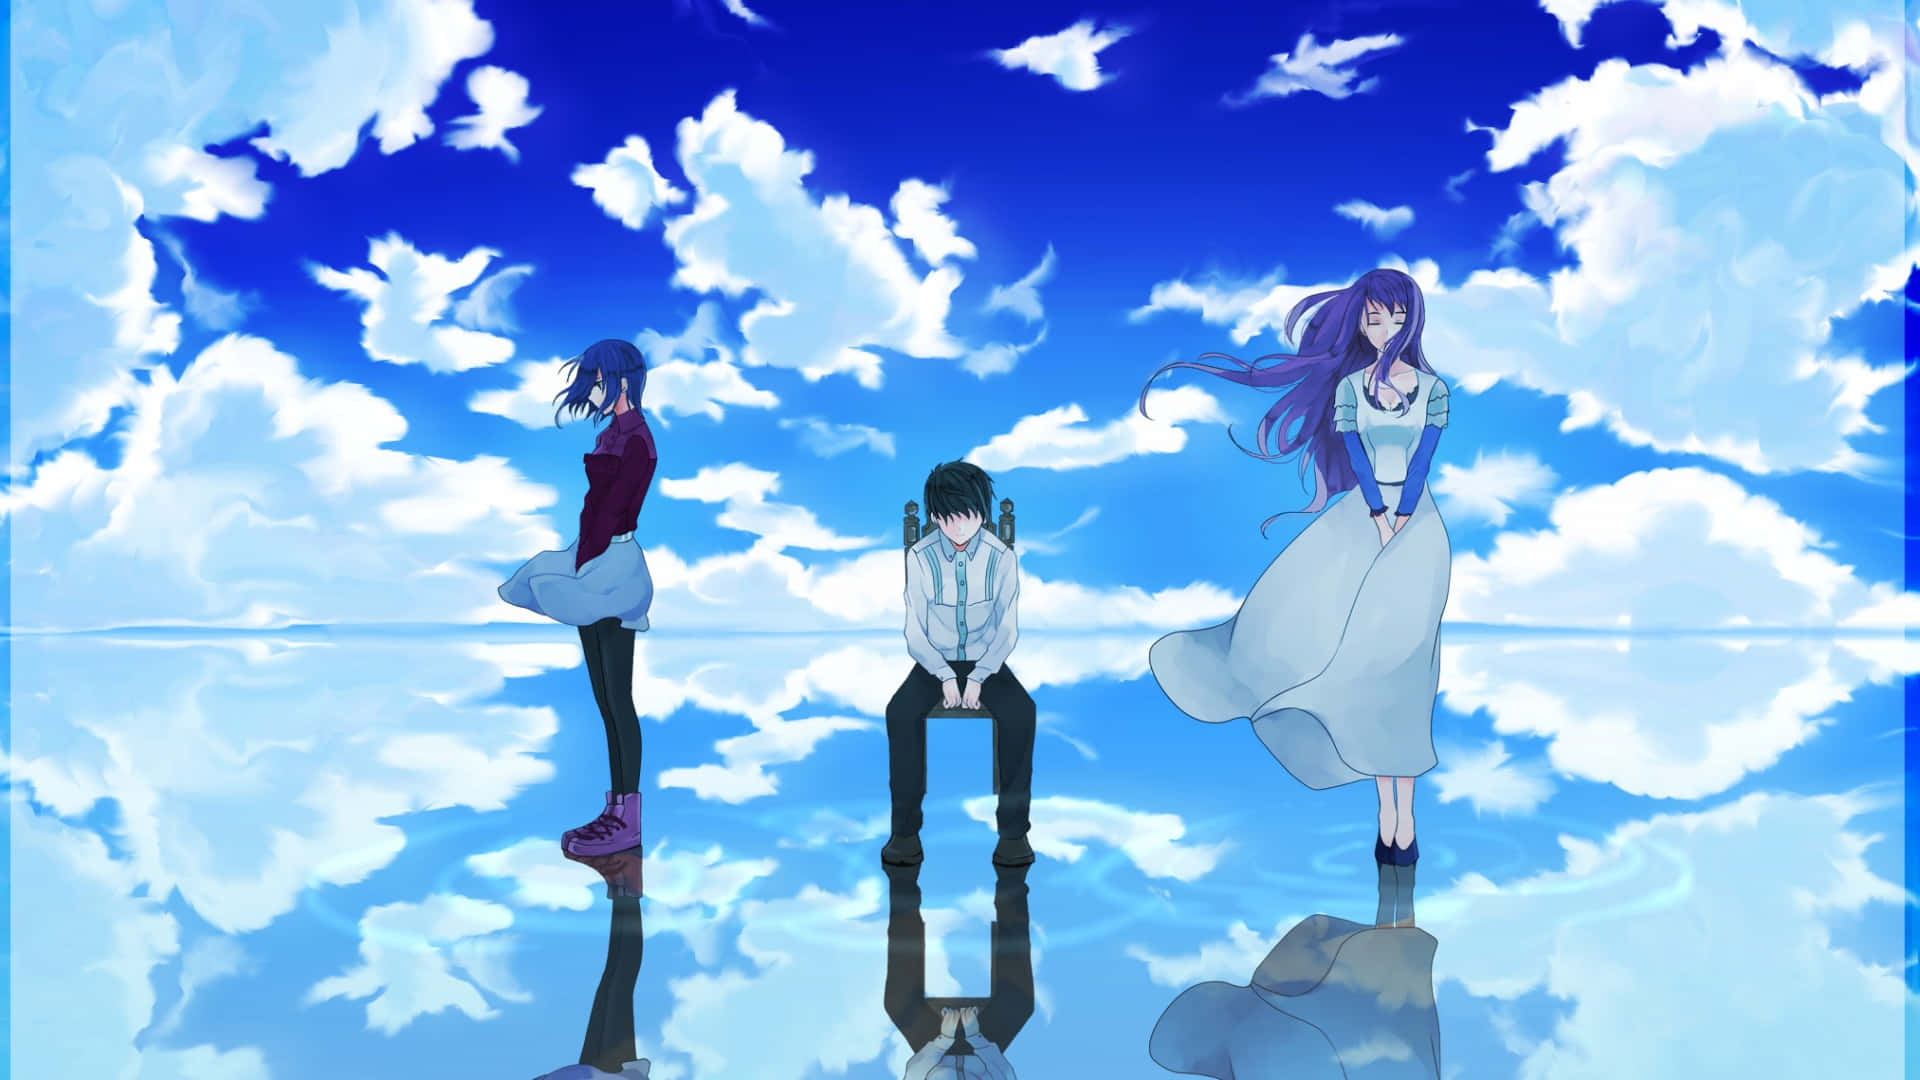 Three Anime Girls Standing In The Clouds Wallpaper